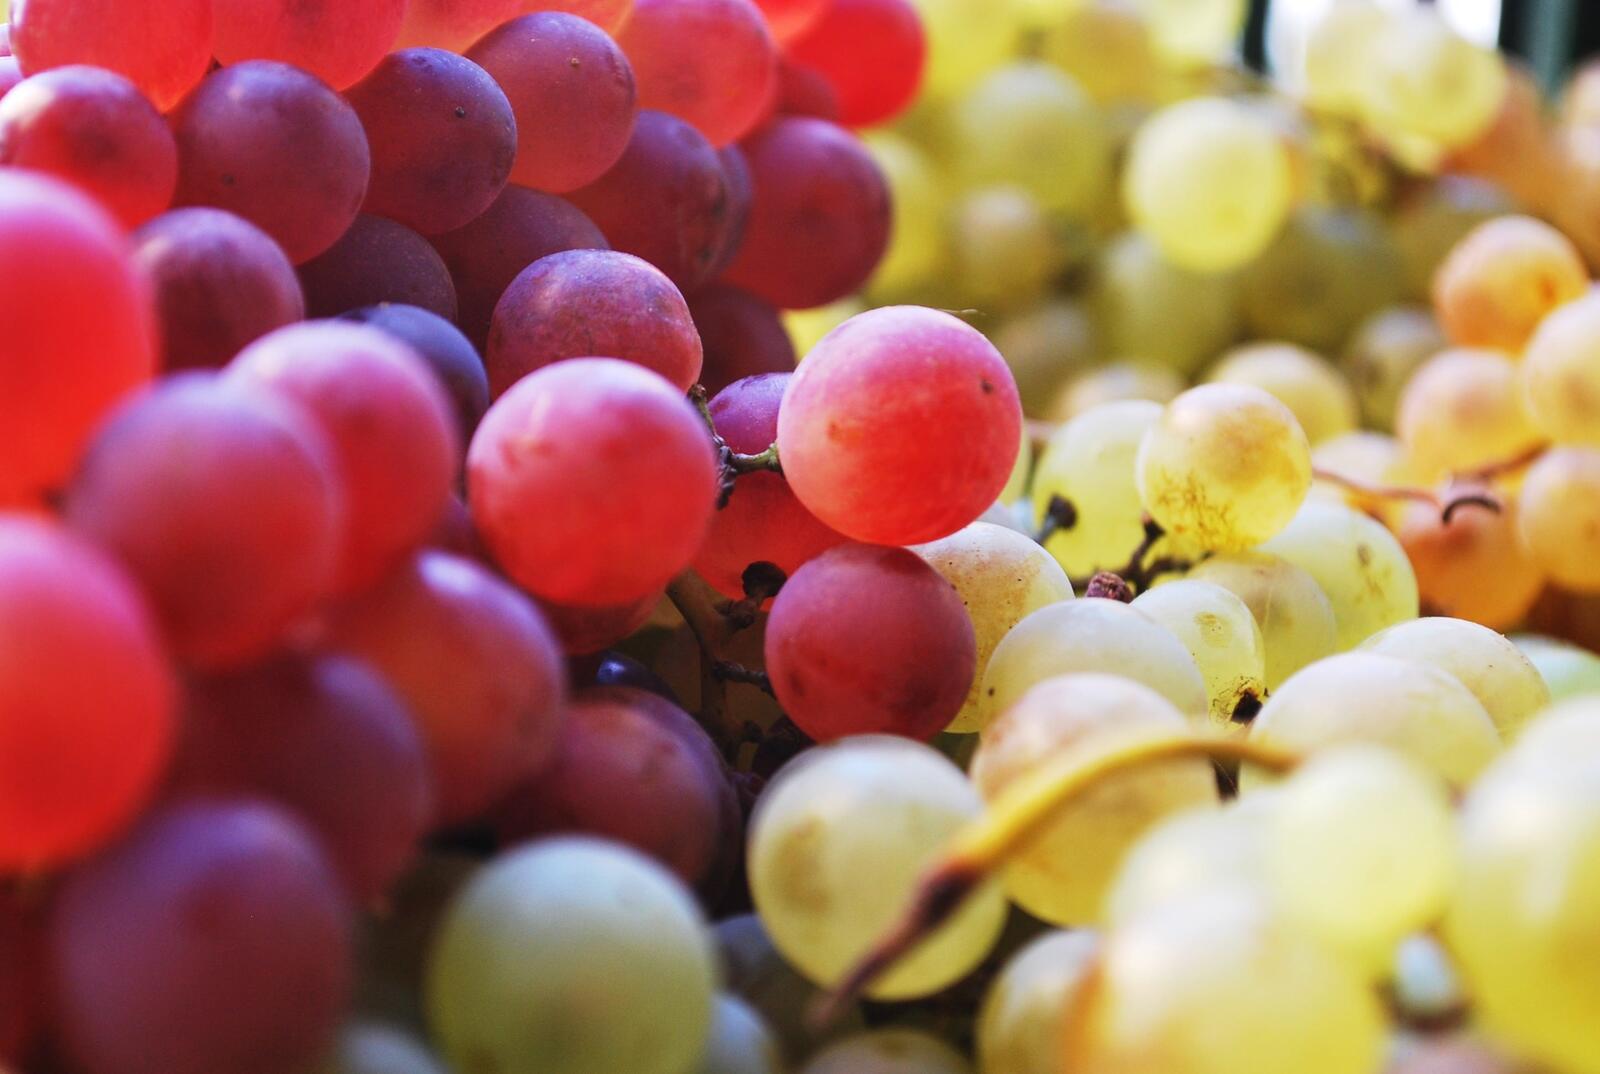 Wallpapers grapes fruits many on the desktop